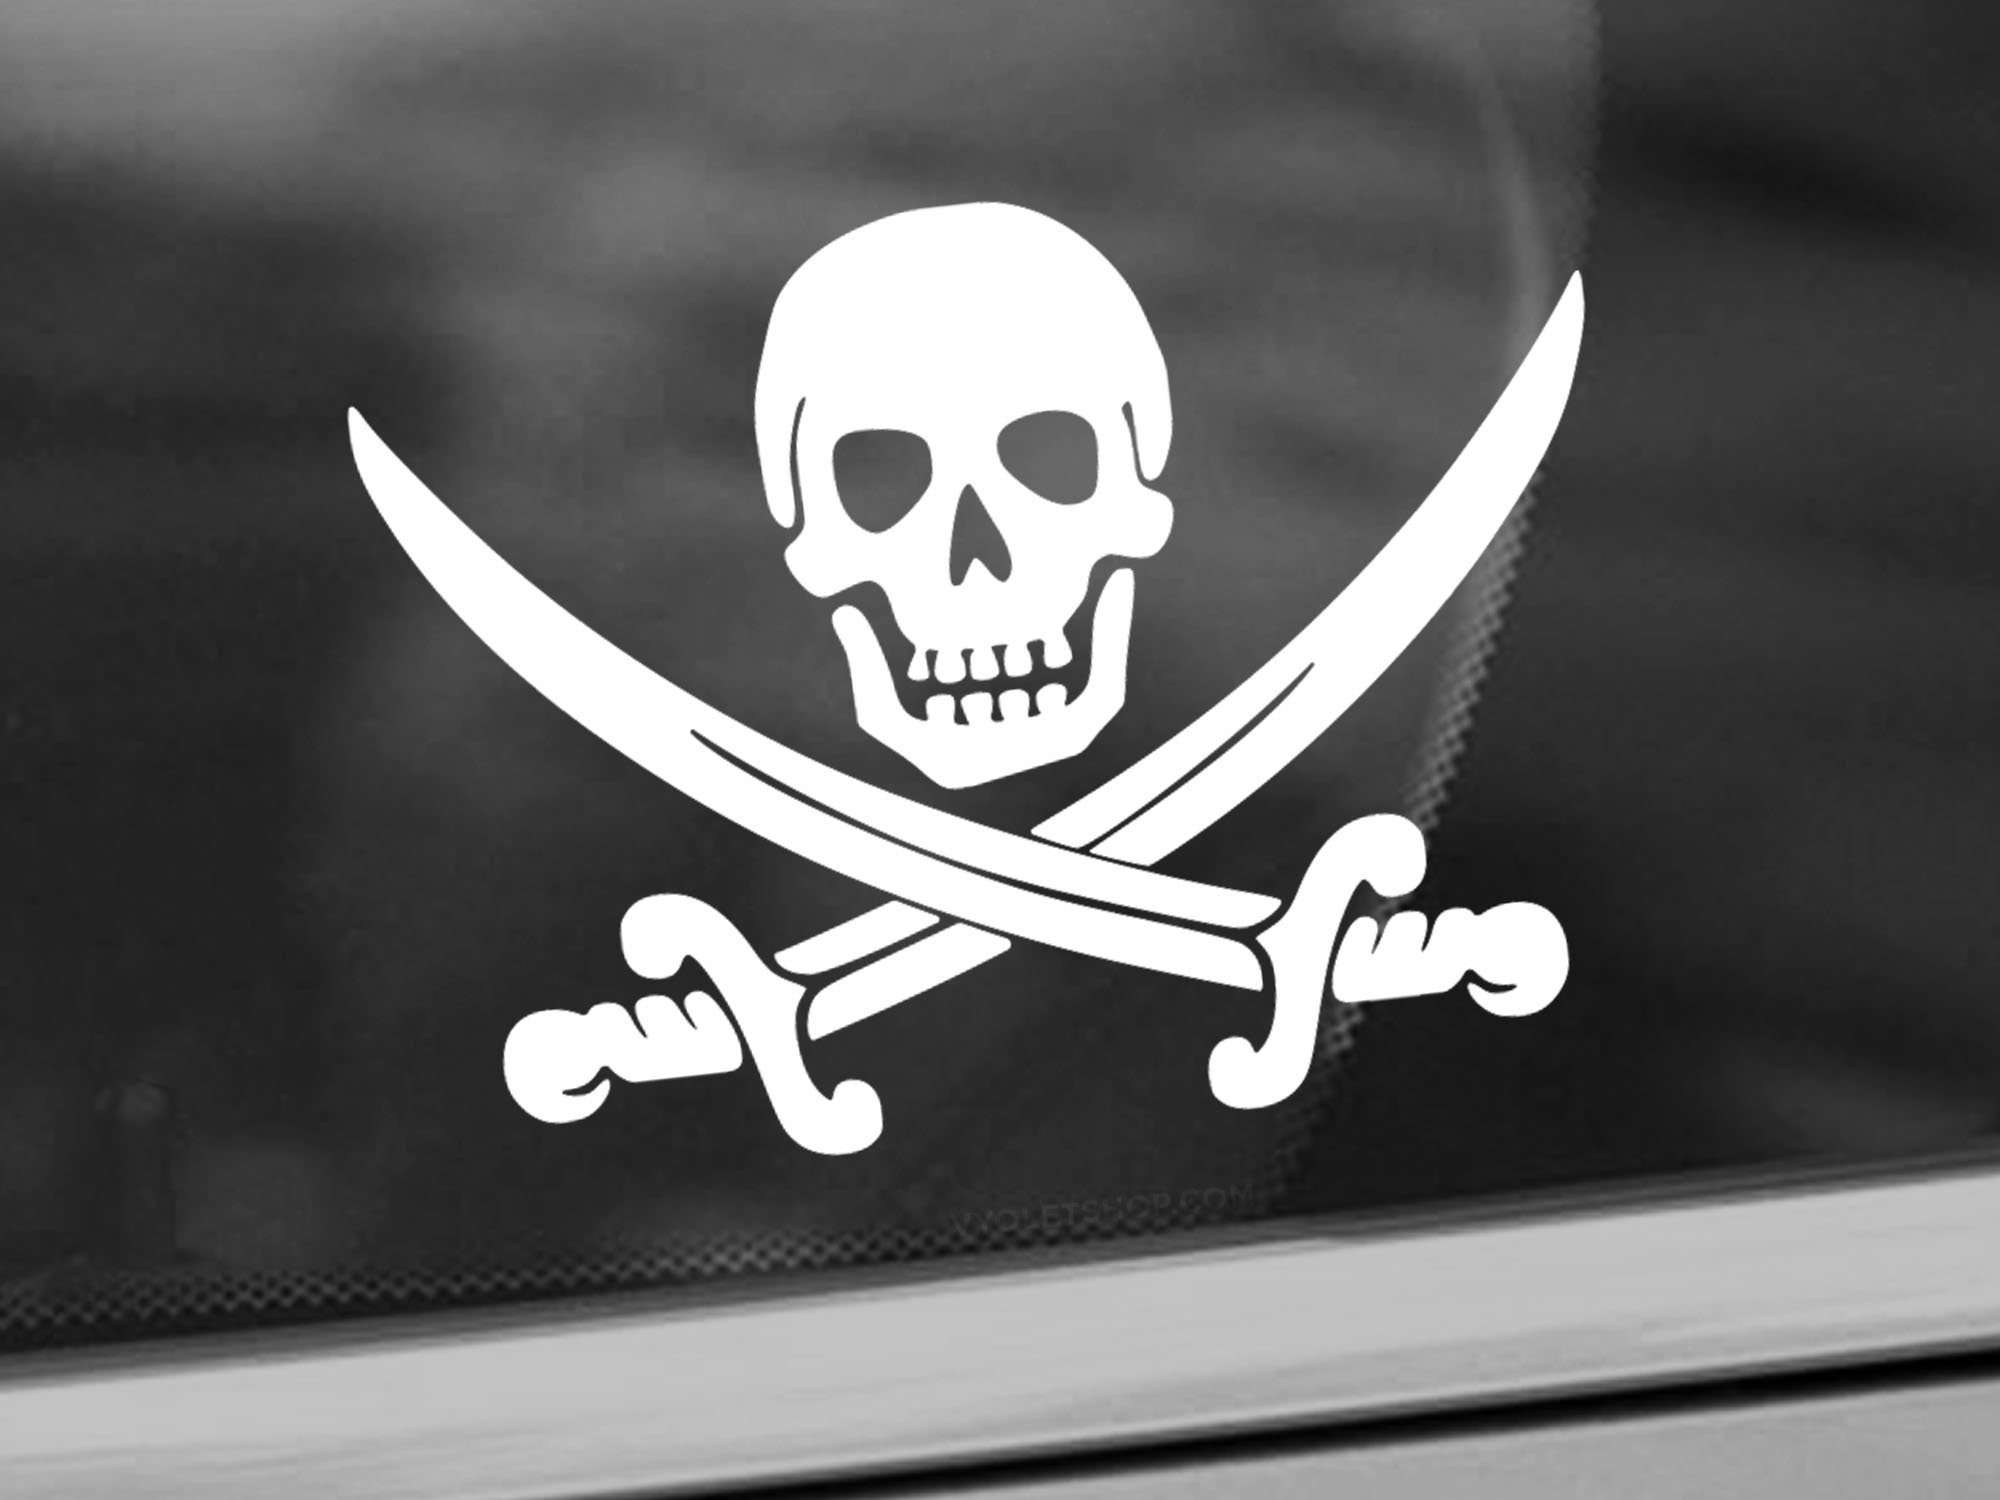 Jolly Roger Pirate Themed Vinyl Decal with “Glowing” Eyes and Nose for  Macbook Laptops and More! – AZ Vinyl Works